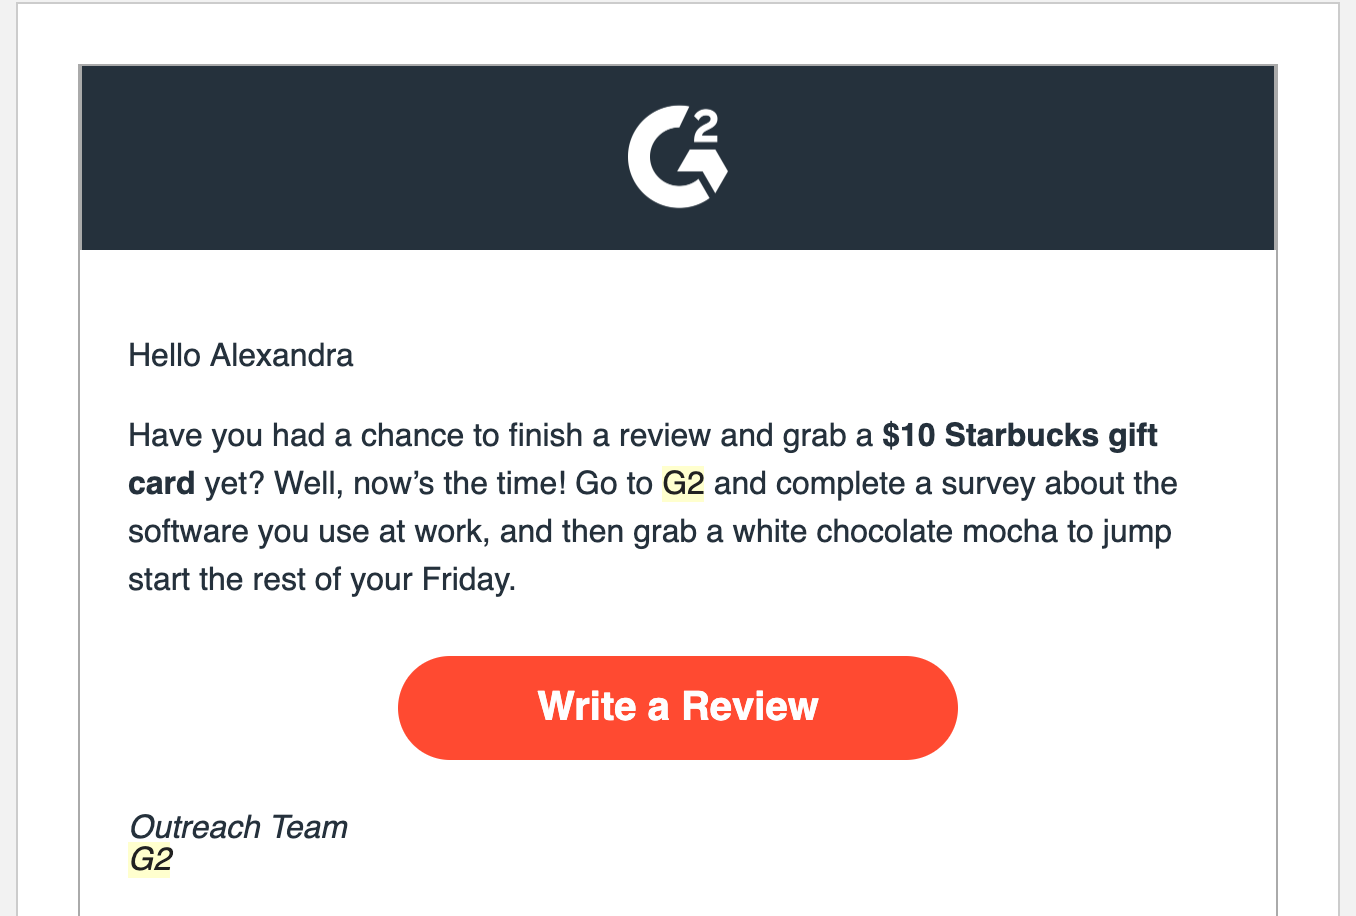 G2 Crowd Email Outreach